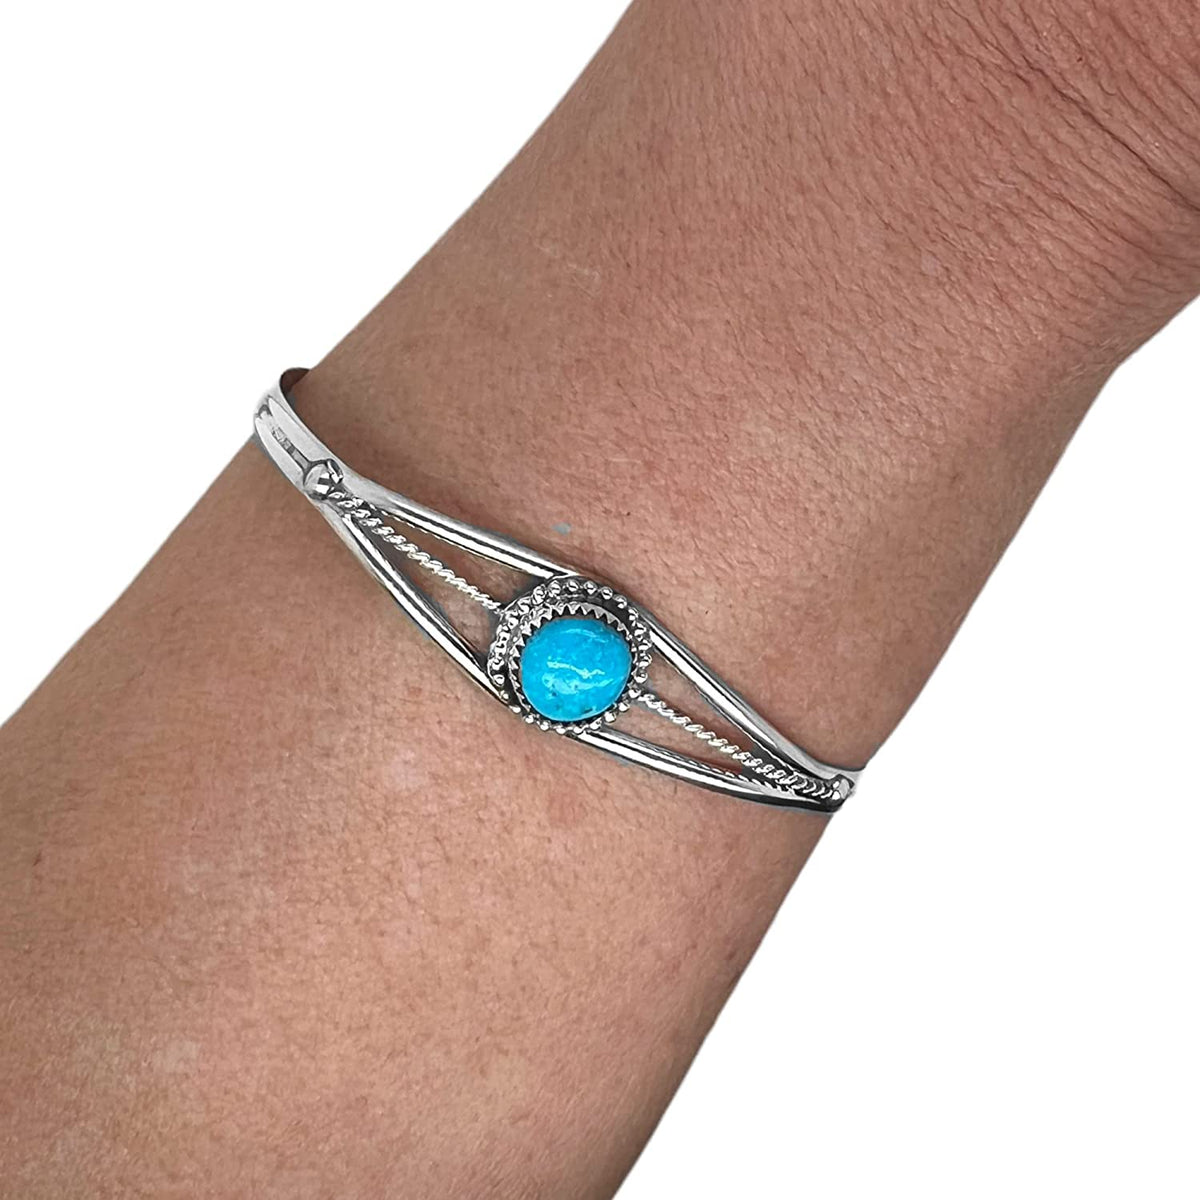 Genuine Sleeping Beauty Turquoise Cuff Bracelet, Sterling Silver, Authentic Native American USA Handmade, Size Women's Small